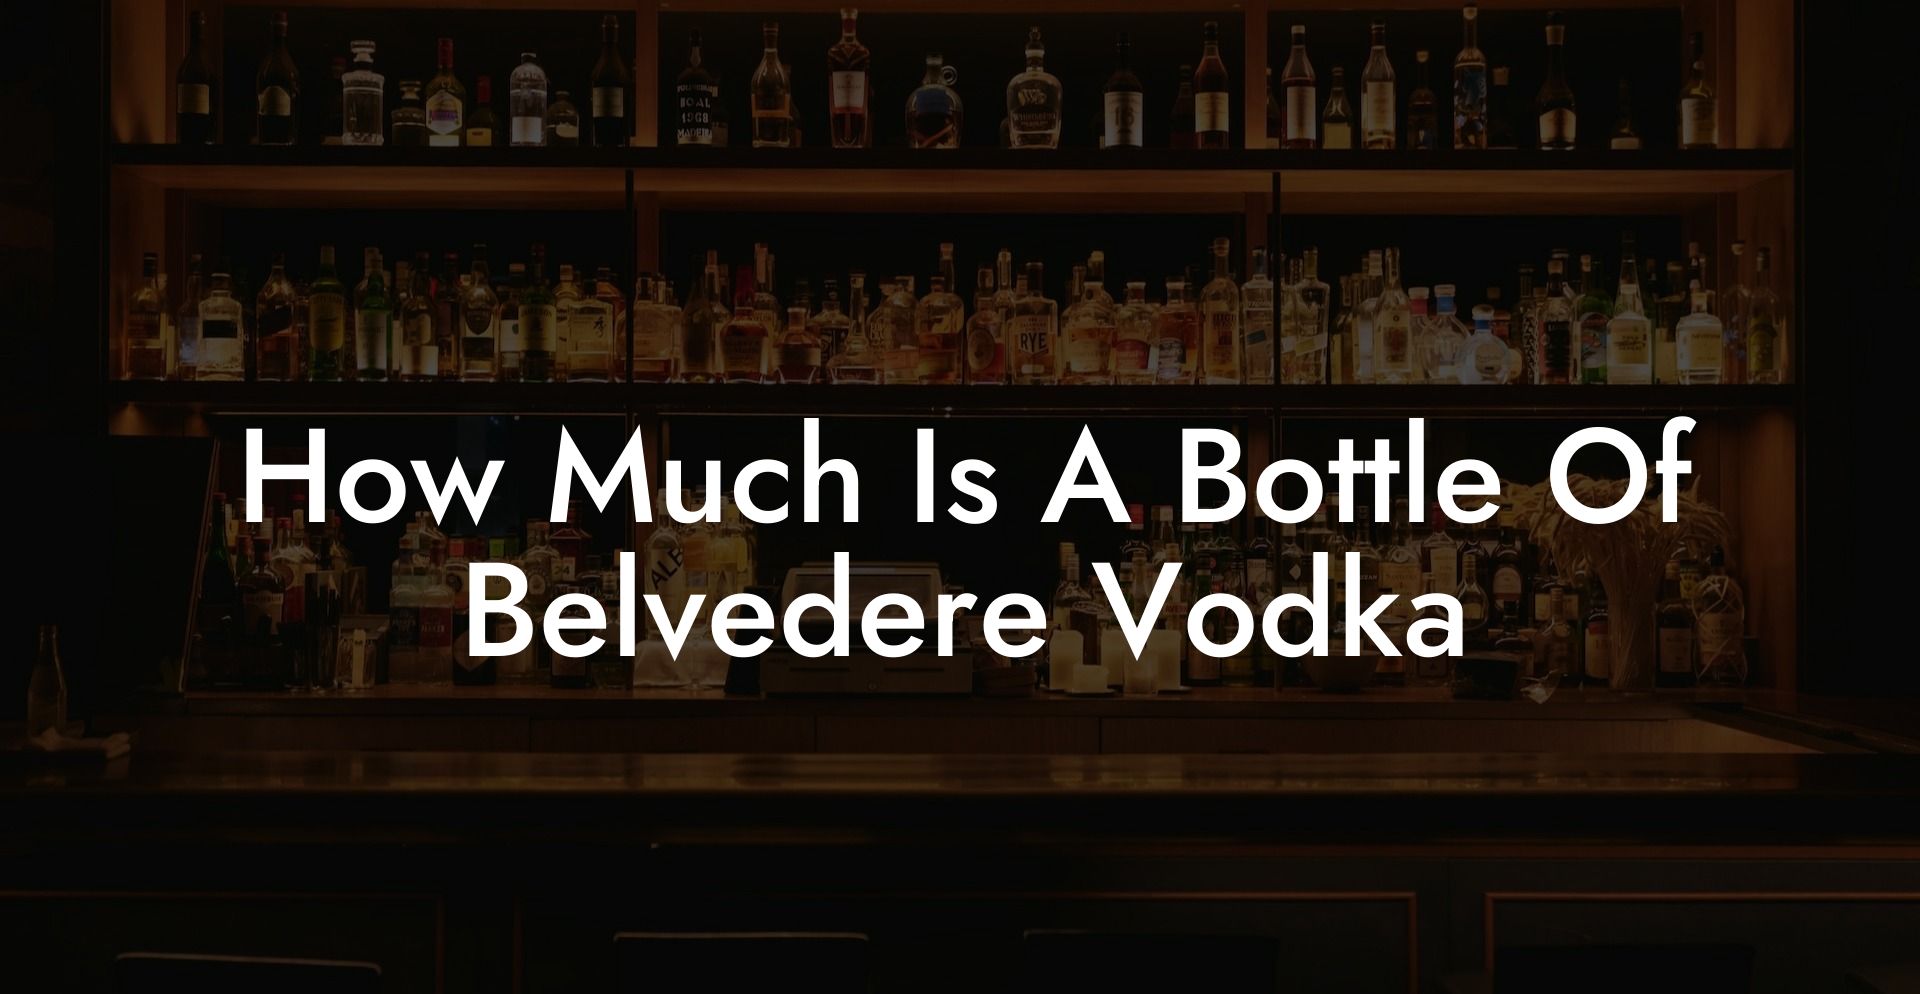 How Much Is A Bottle Of Belvedere Vodka